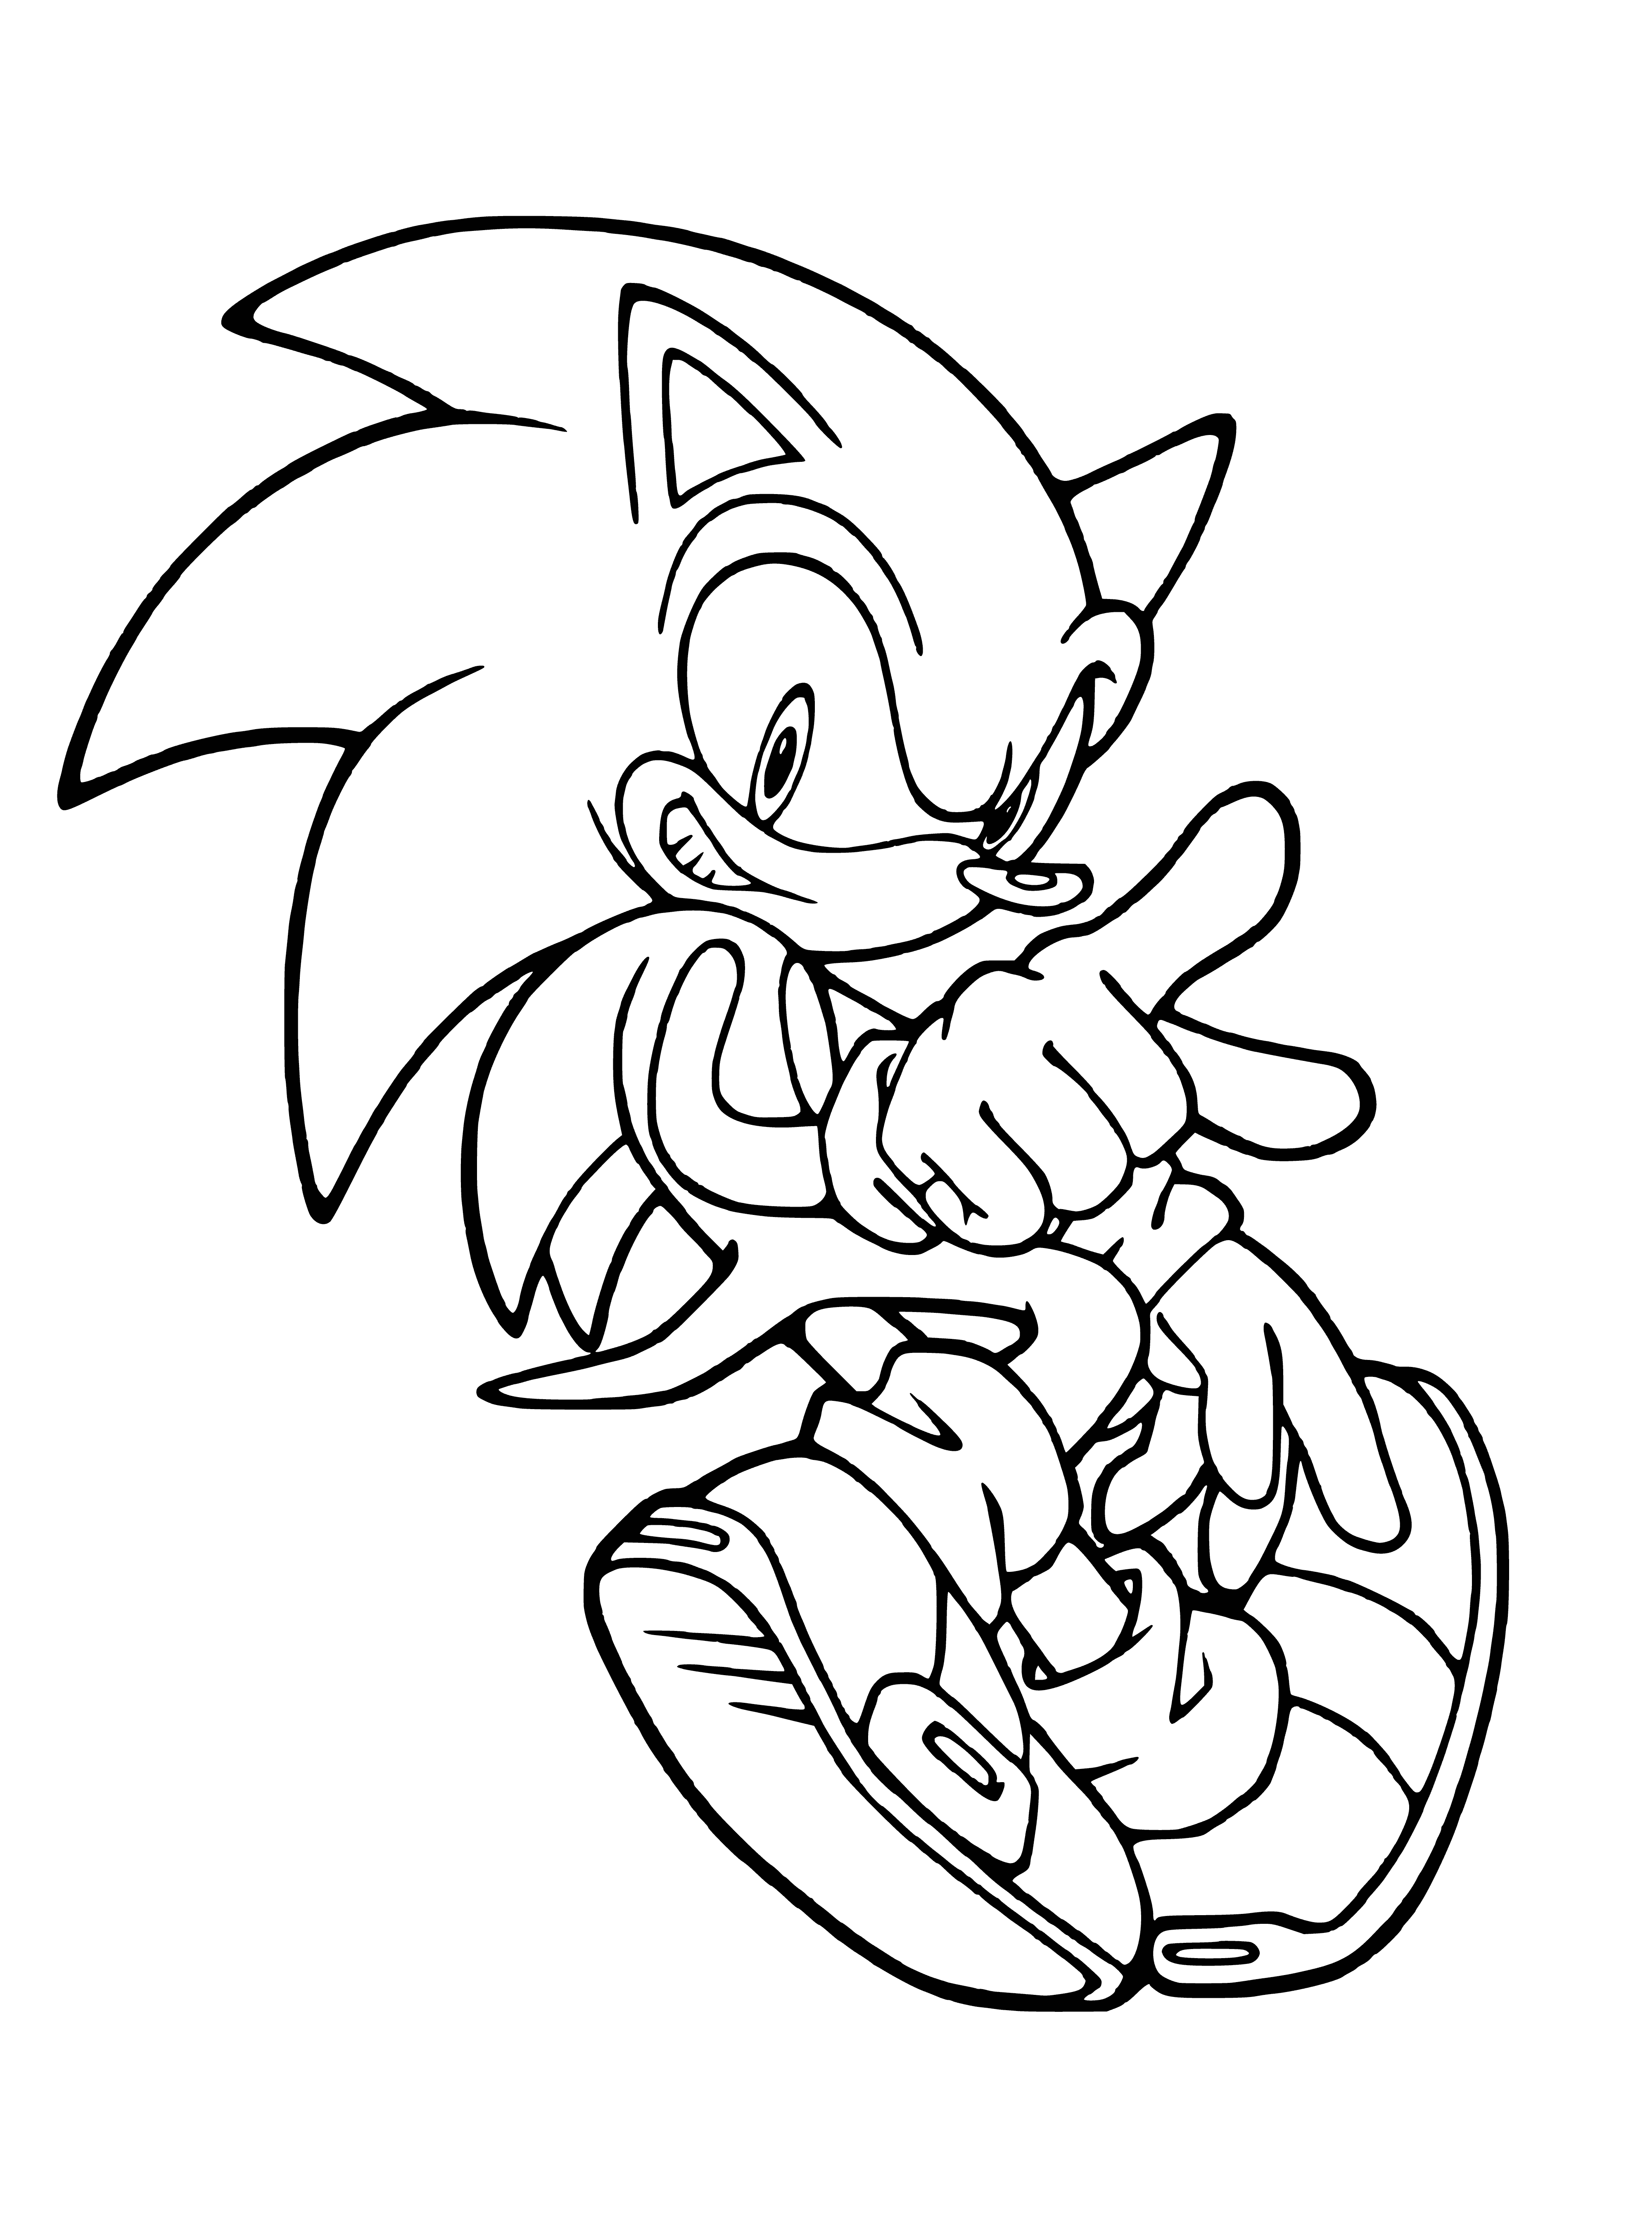 Sonic X coloring page